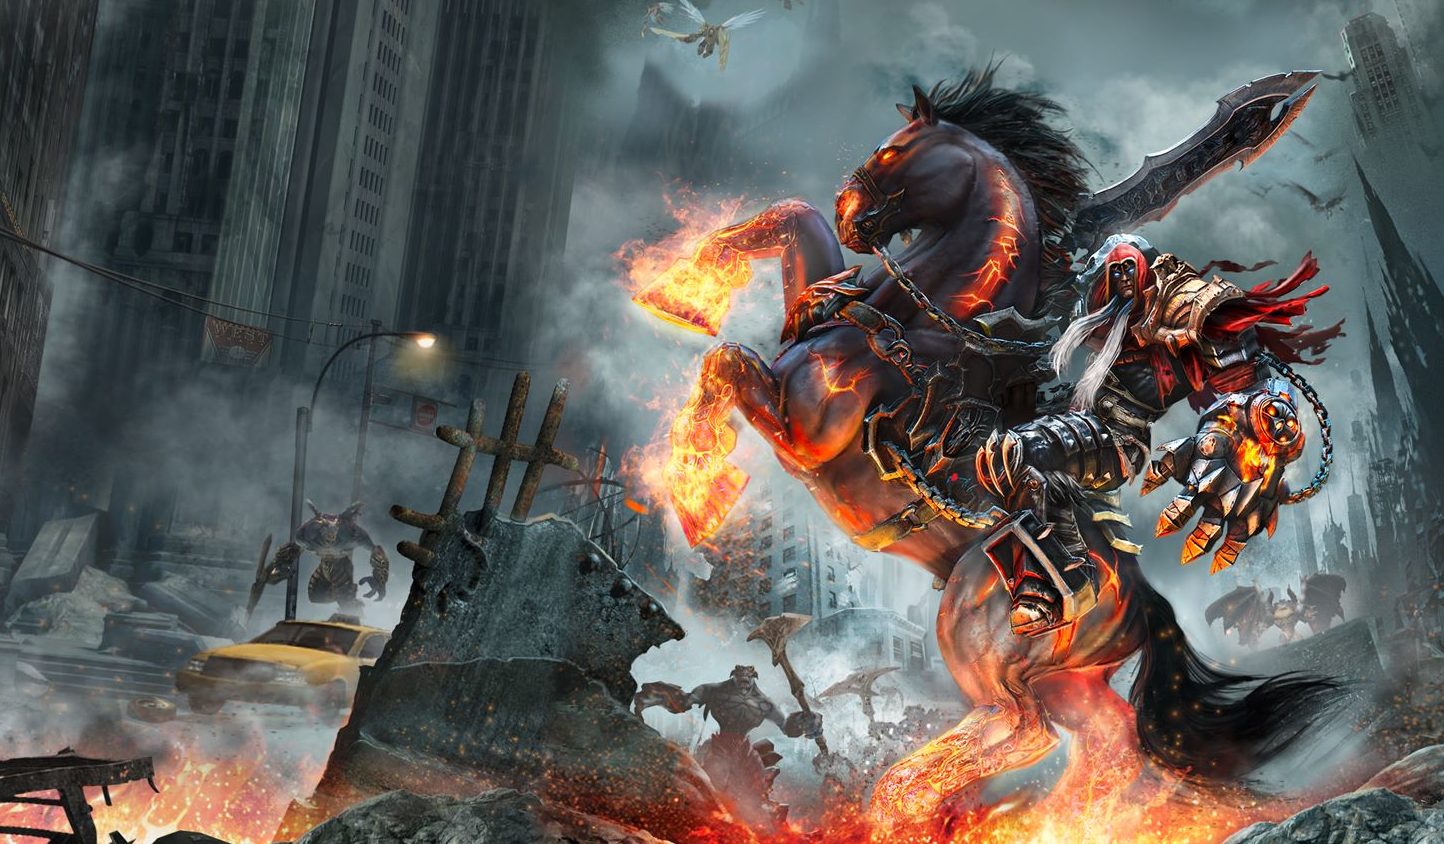 Darksiders, Darksiders 2, and Steep Are Free At The Epic Games Store — Too  Much Gaming